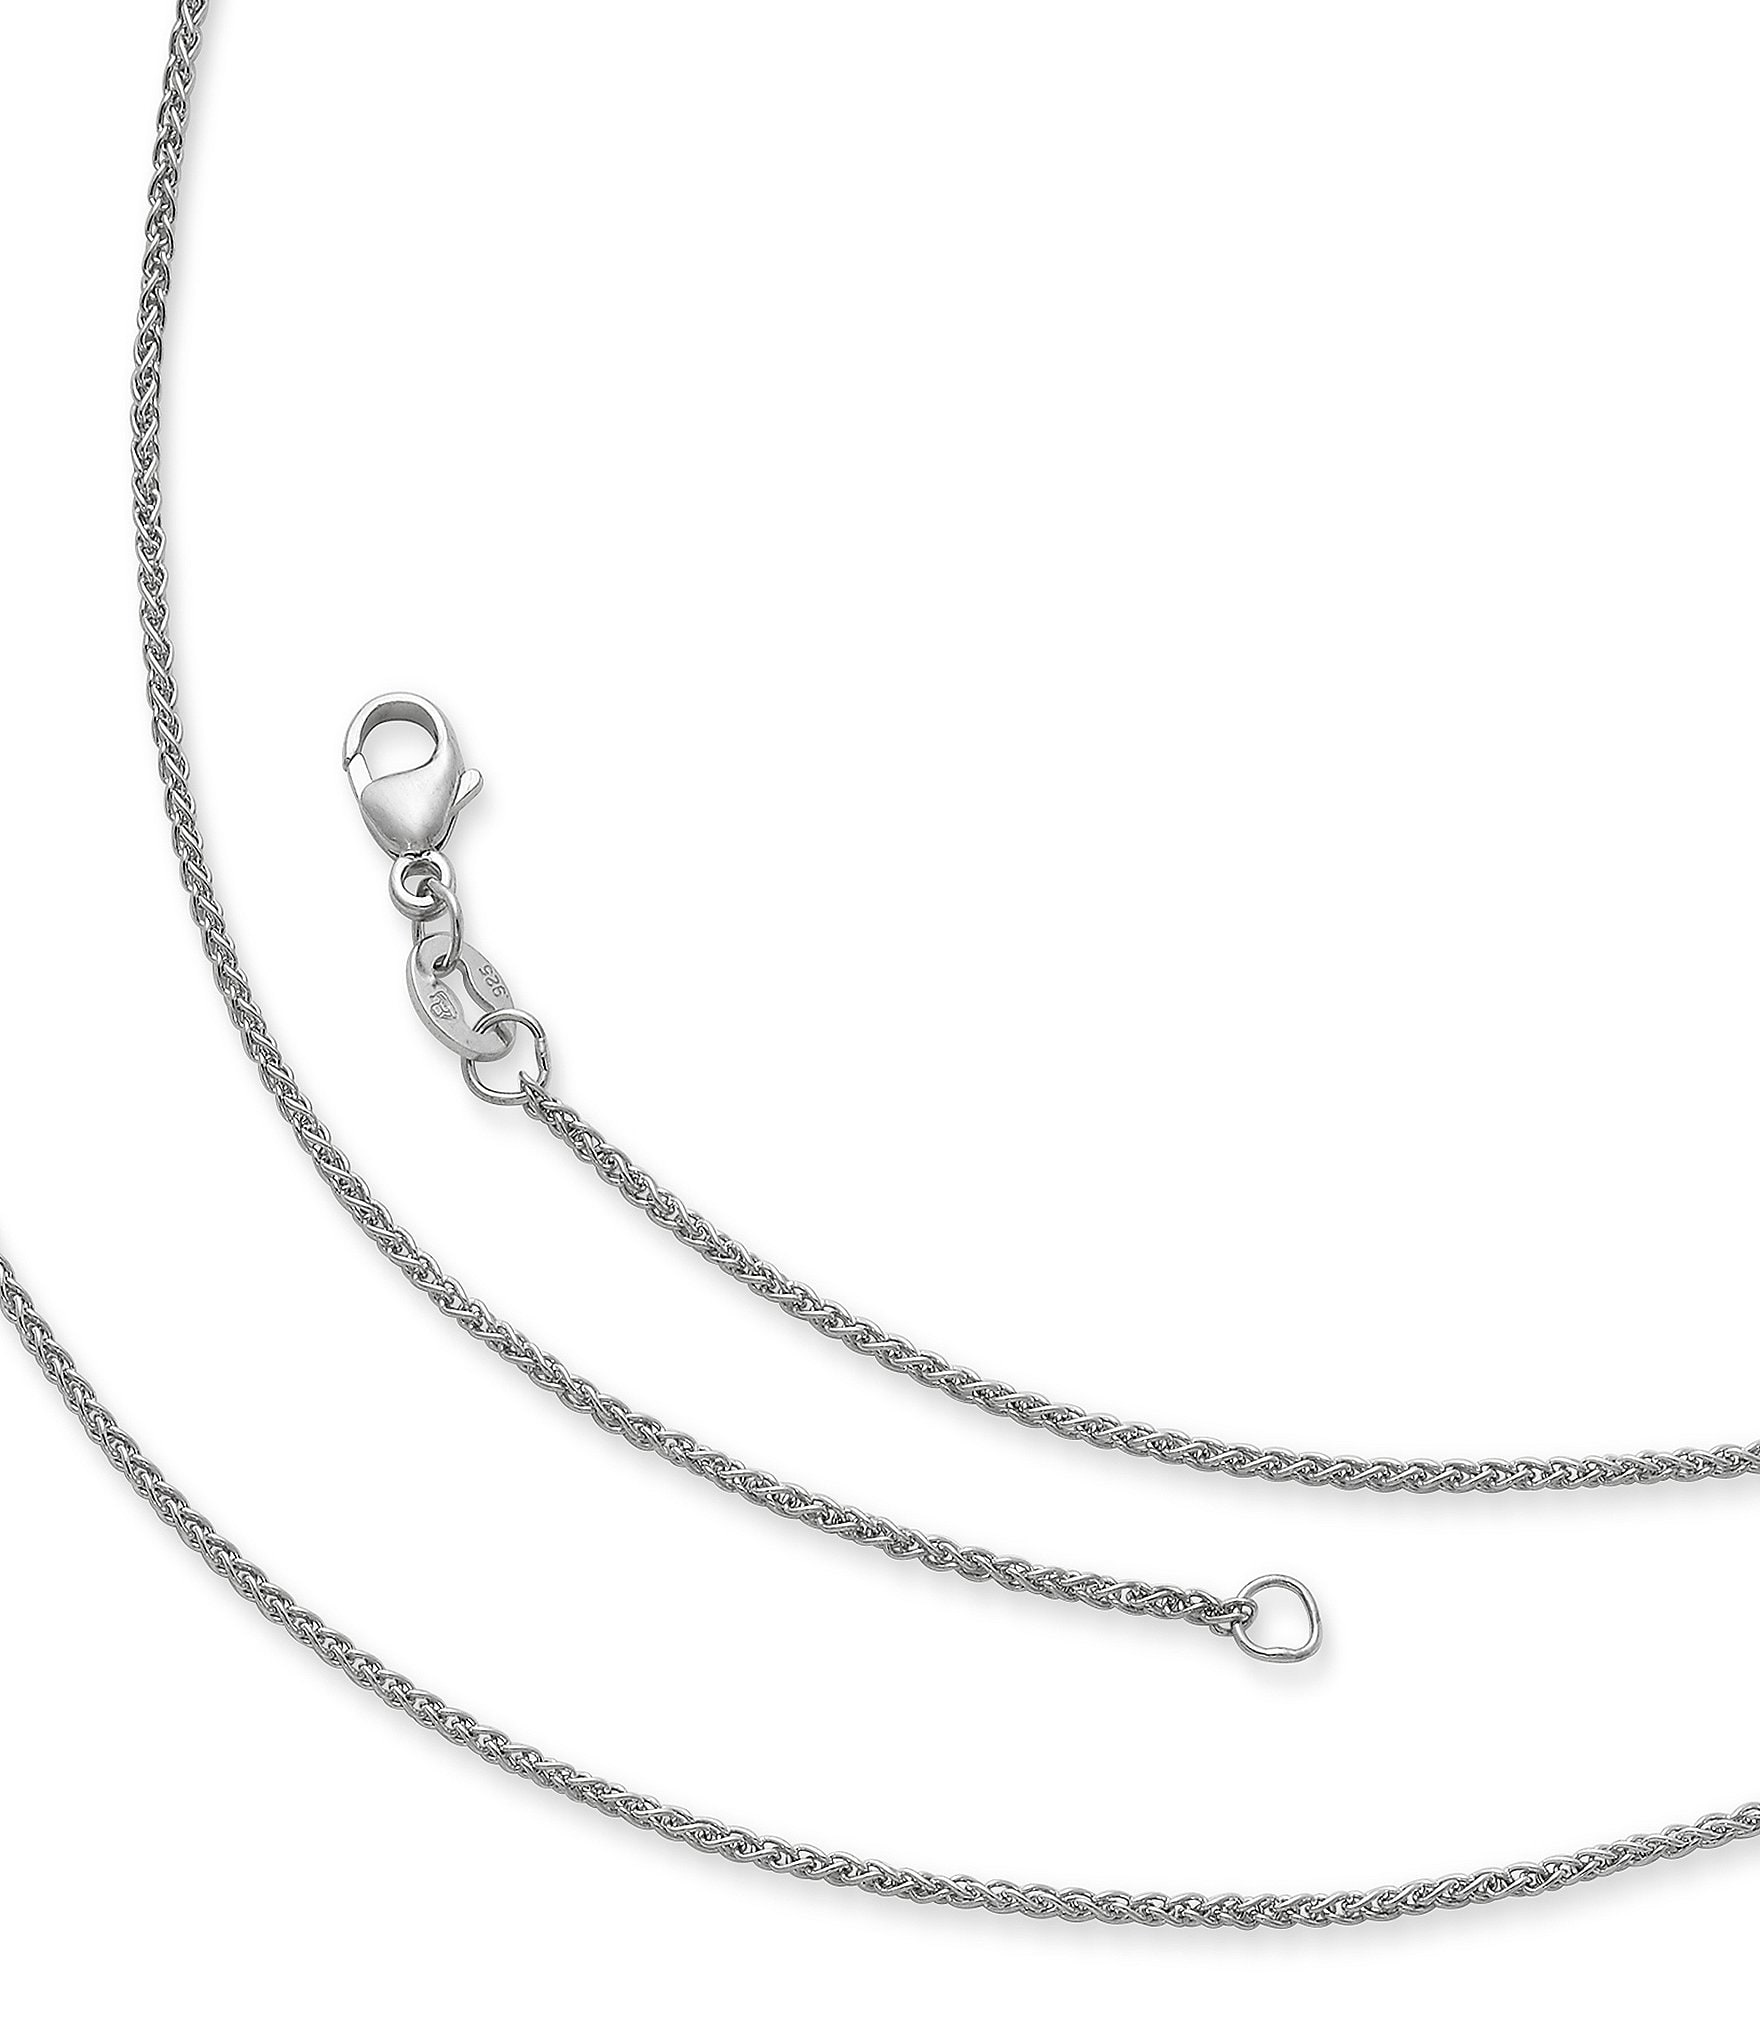 Silvertraits Thin Wallet Chain Made of Sterling Silver (Spiga Chain)